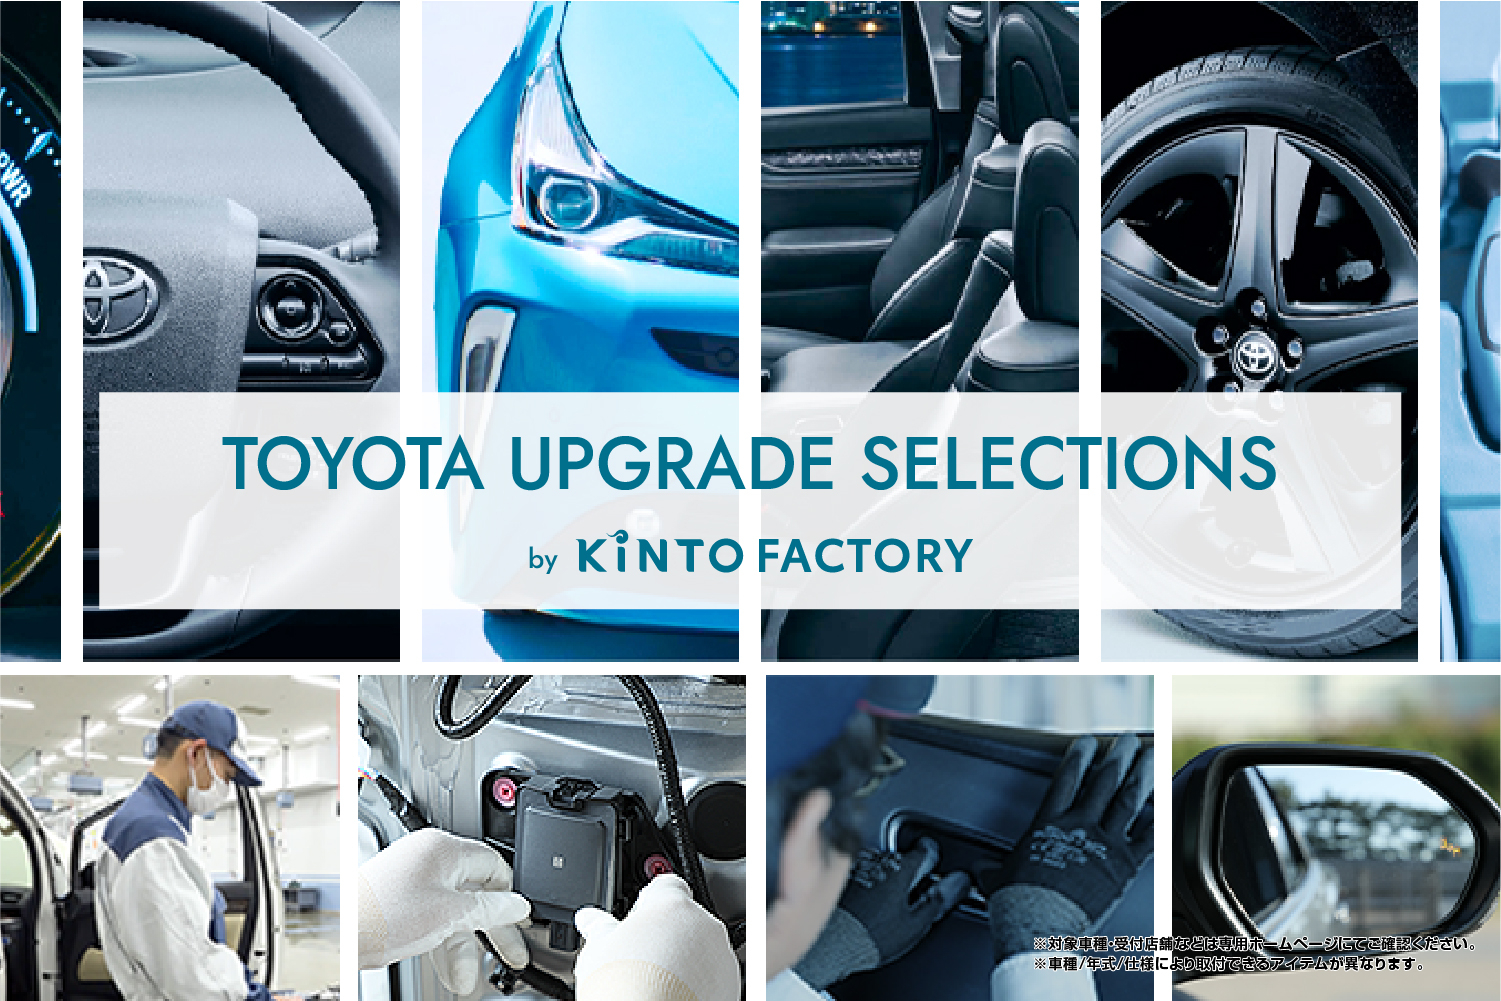 TOYOTA UPGRADE SELECTIONS